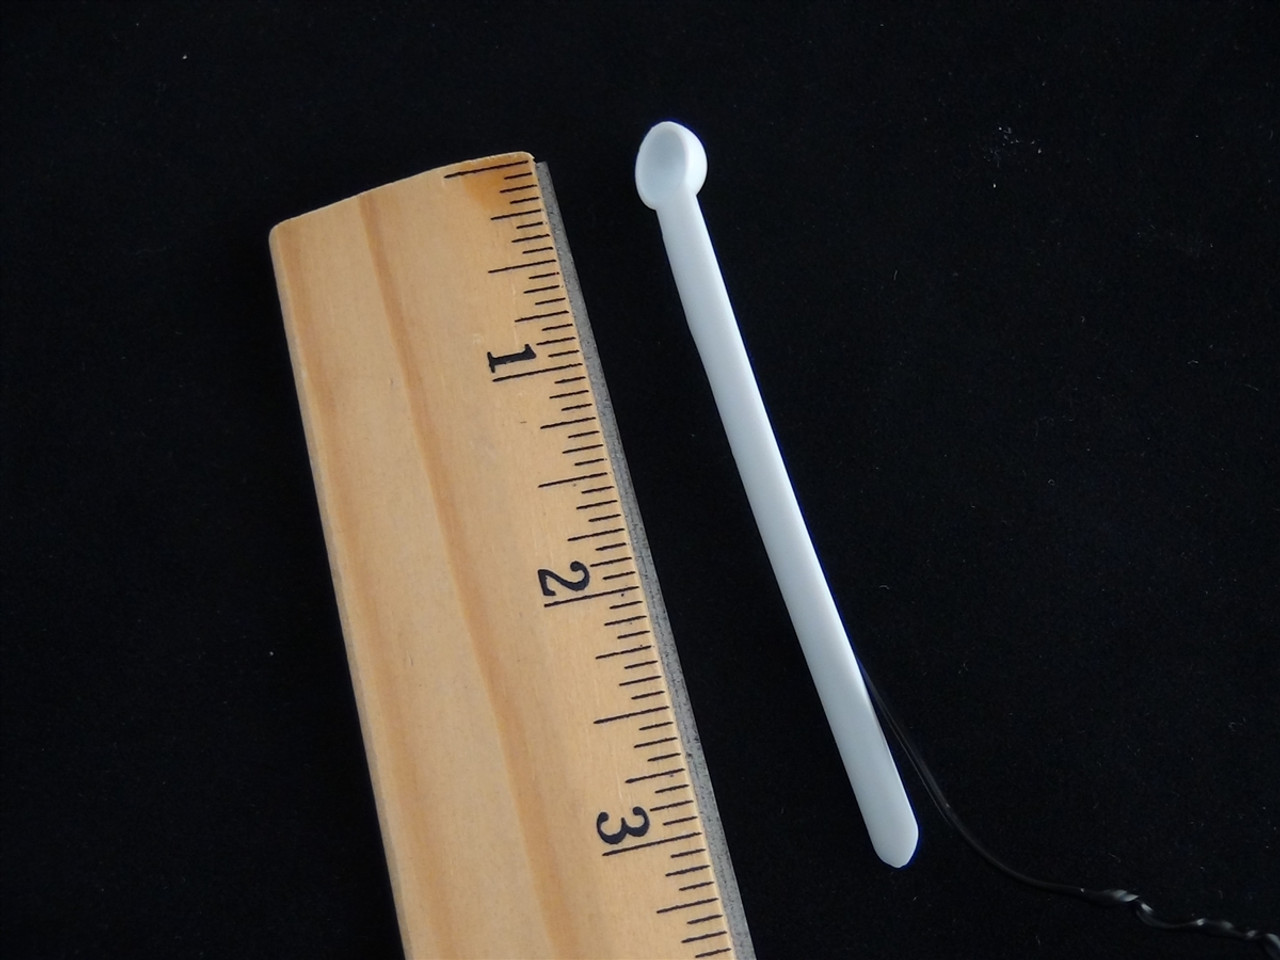 MG MICRO SCOOP SPOON FOR MEASURING SMALL POWDERS SUPPLEMENTS